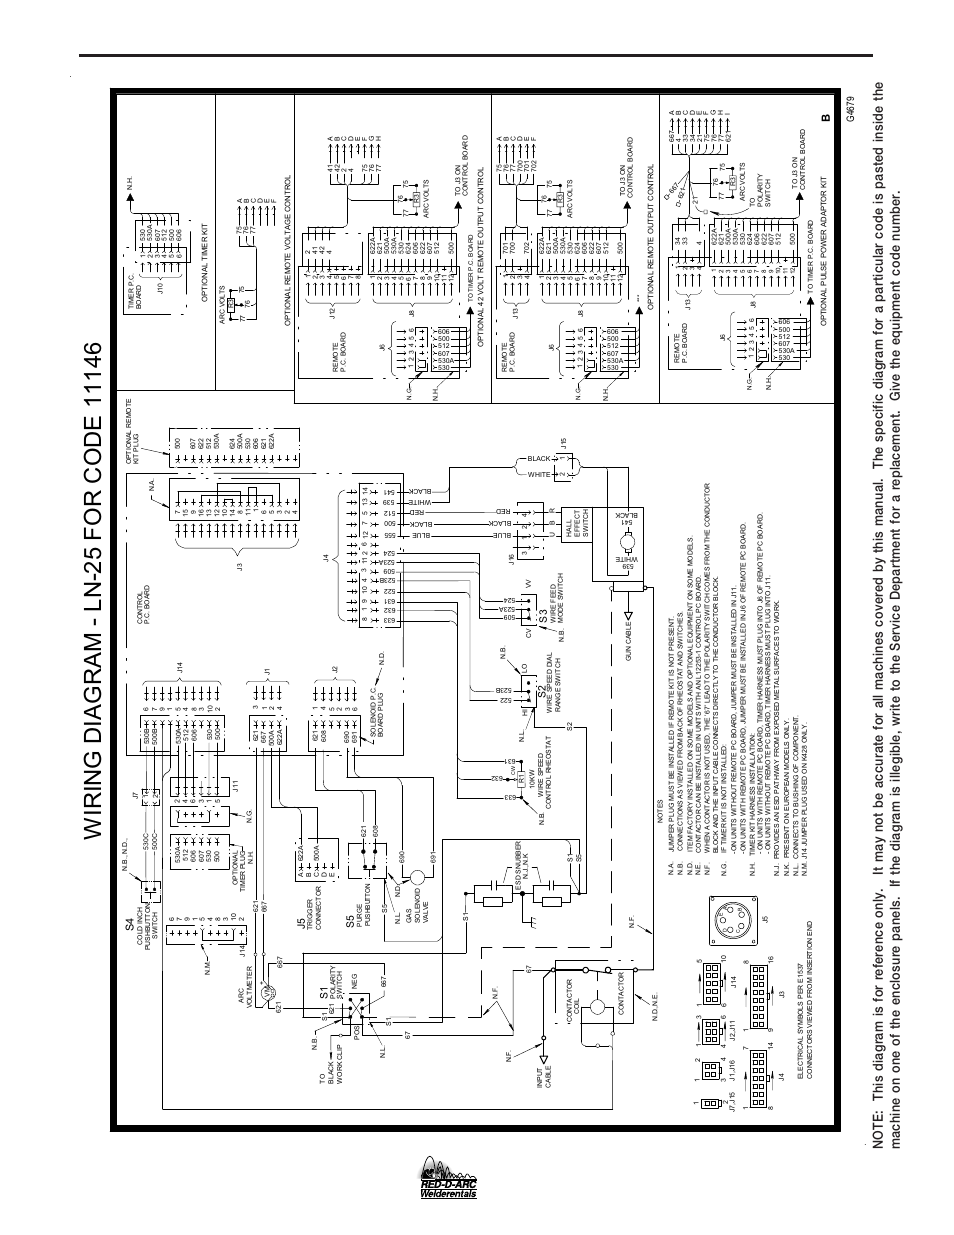 Wiring diagram, Ln-25, S2 s3 s1 | G4 67 9 | Lincoln Electric IM677 RED-D-ARC LN-25 User Manual | Page 30 / 34